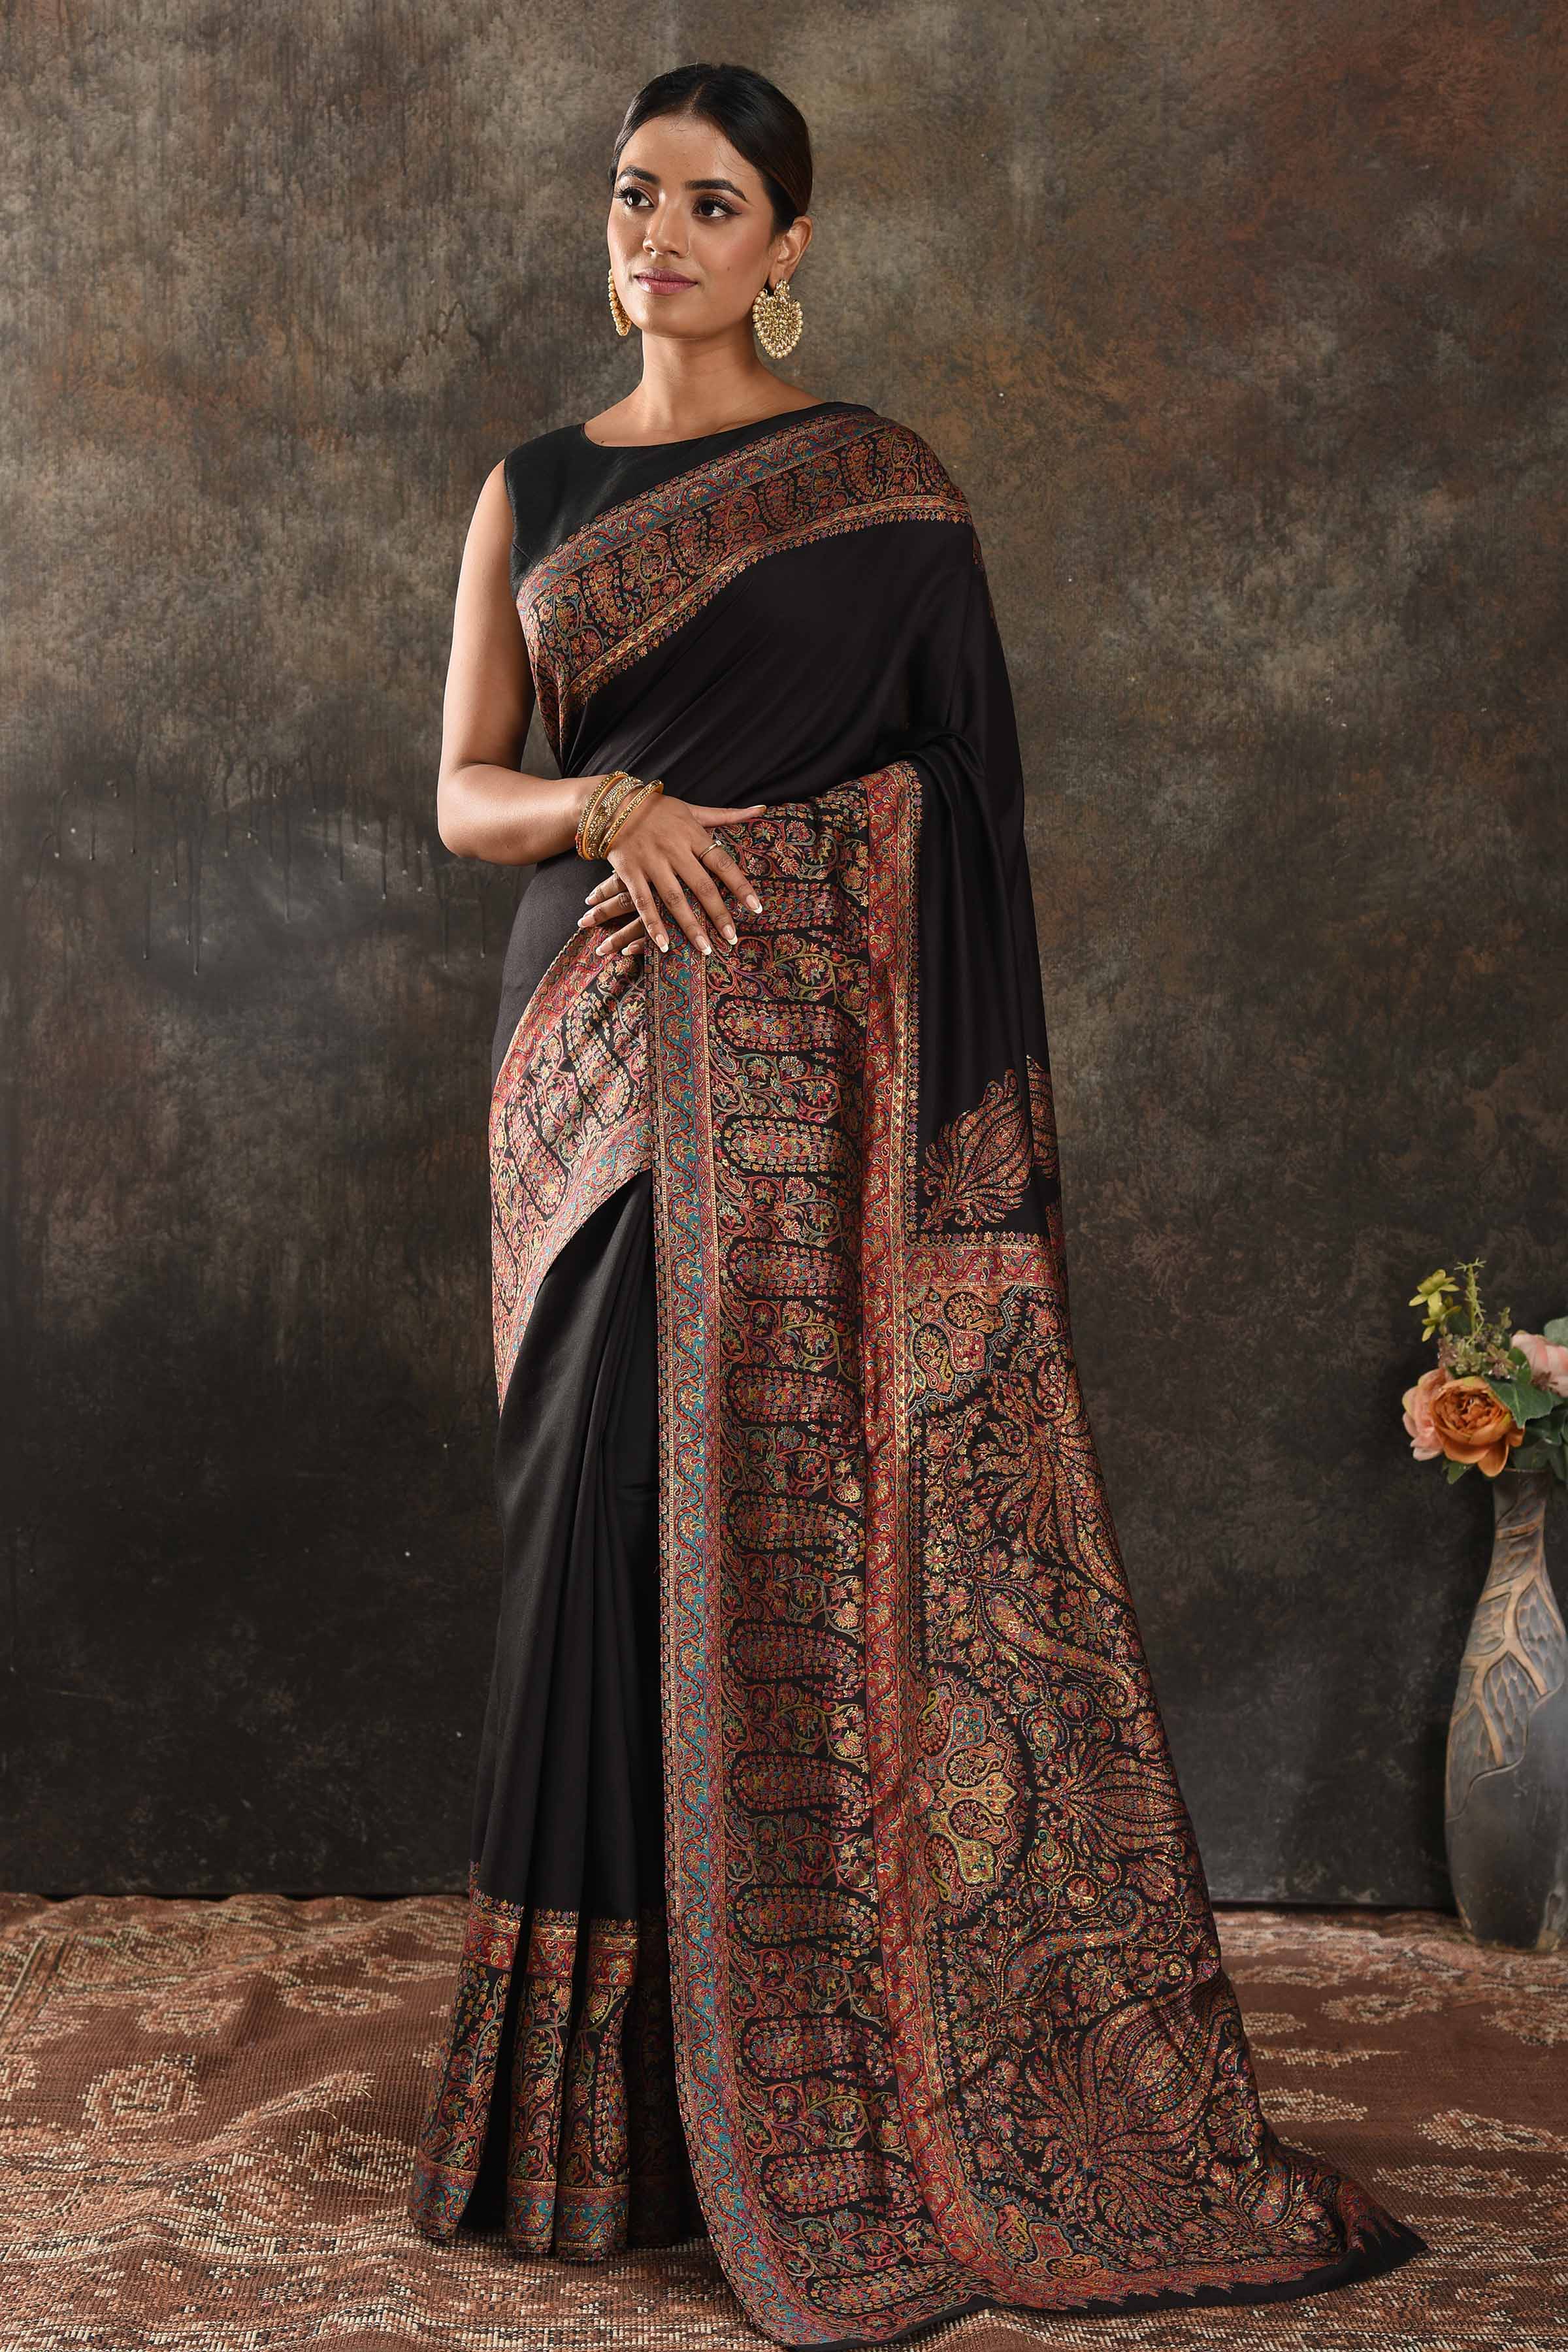 Muga Silk Saree Latest Price From Top Manufacturers, Suppliers & Dealers